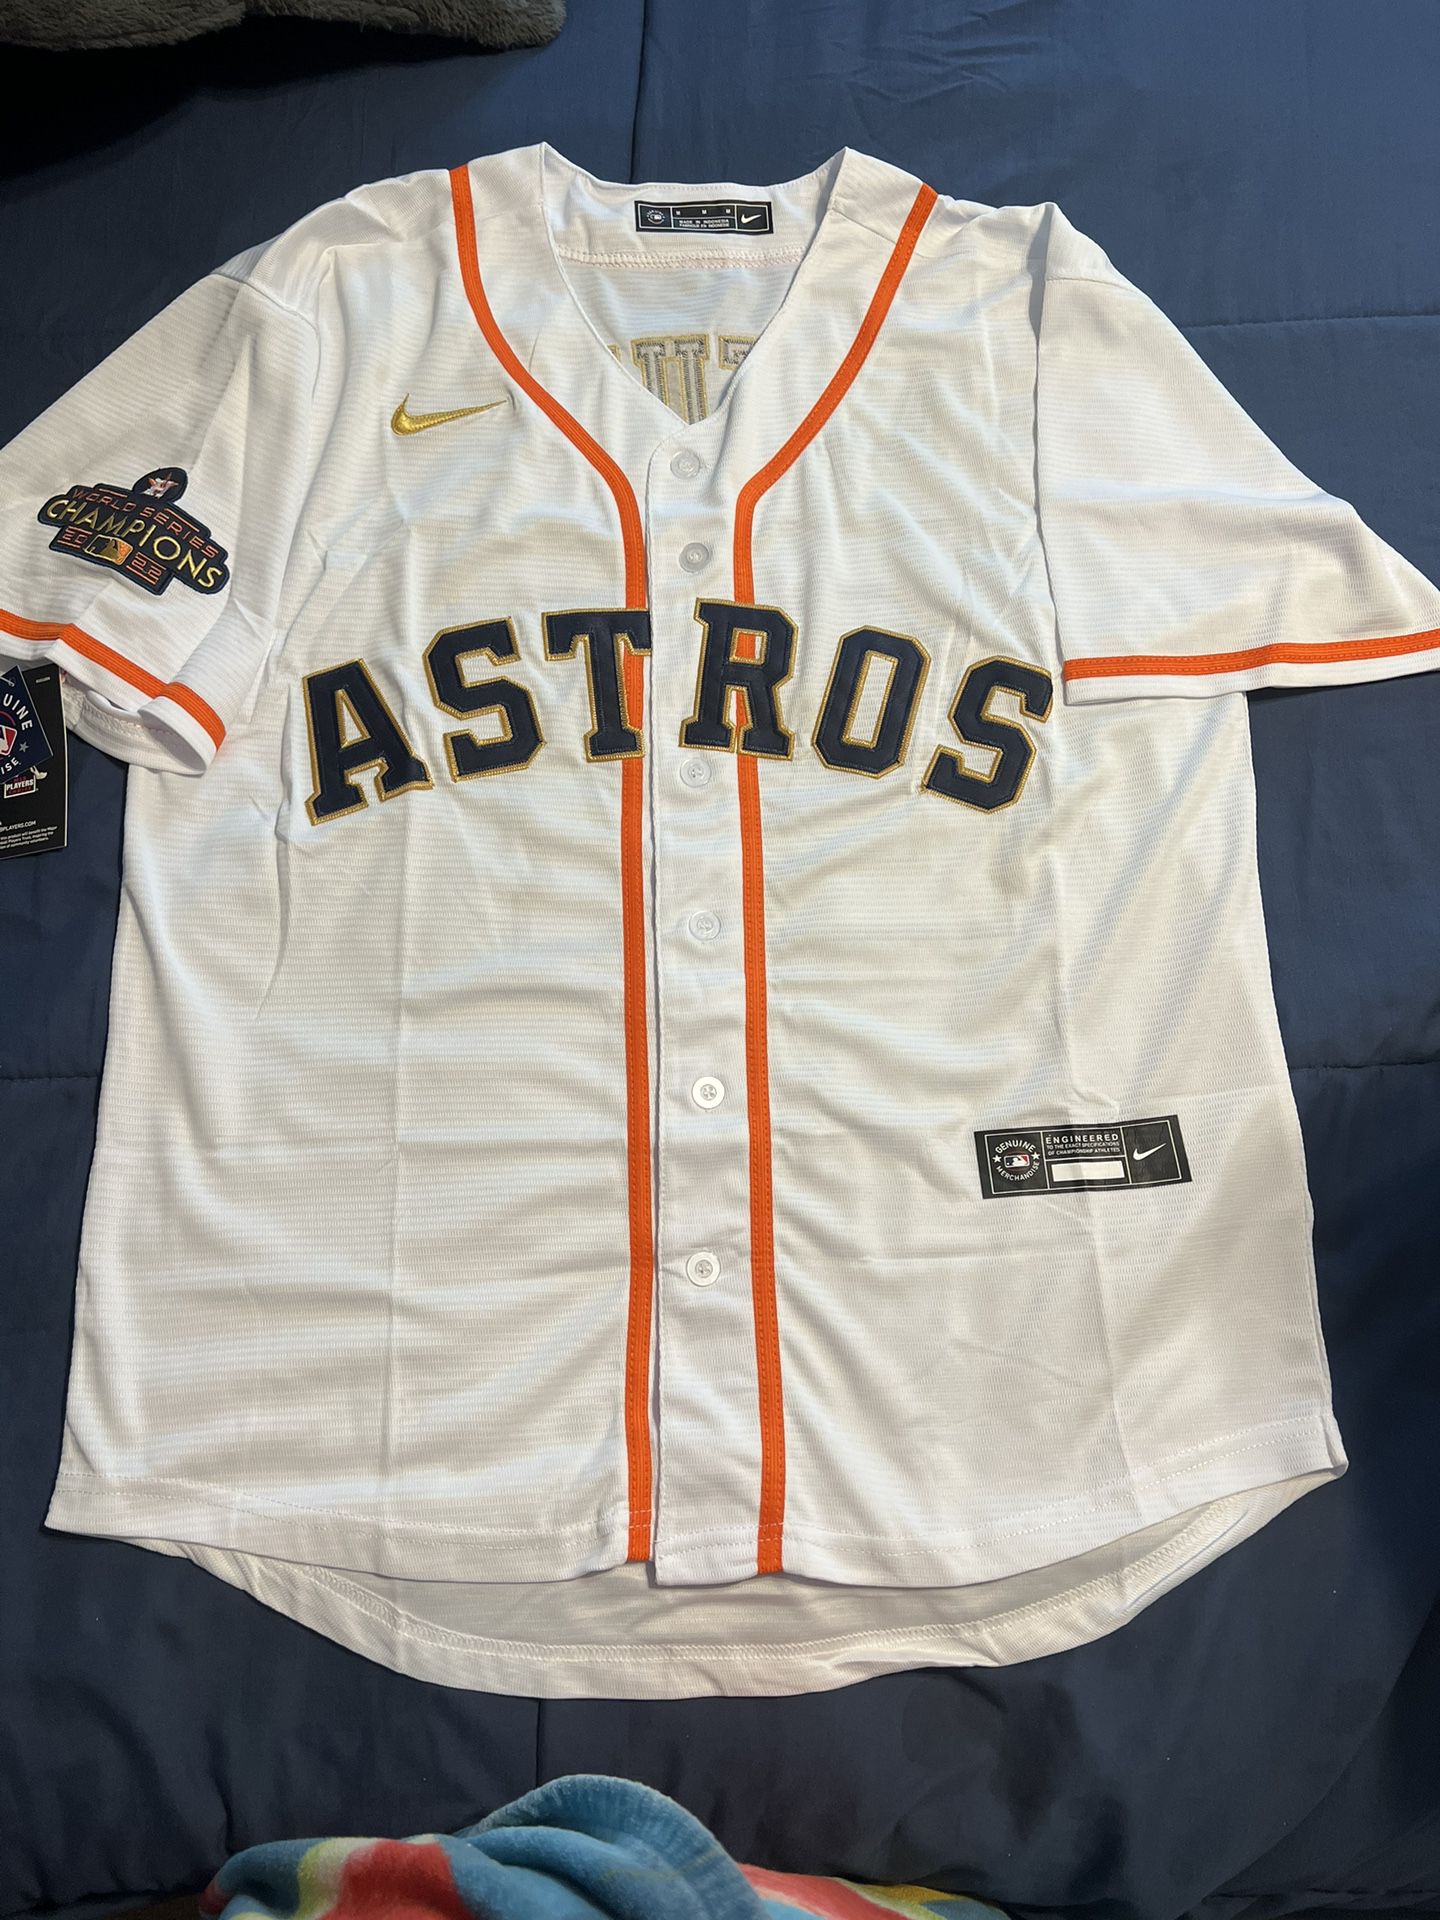 Houston Astros Gold Rush Jersey for Sale in Conroe, TX - OfferUp